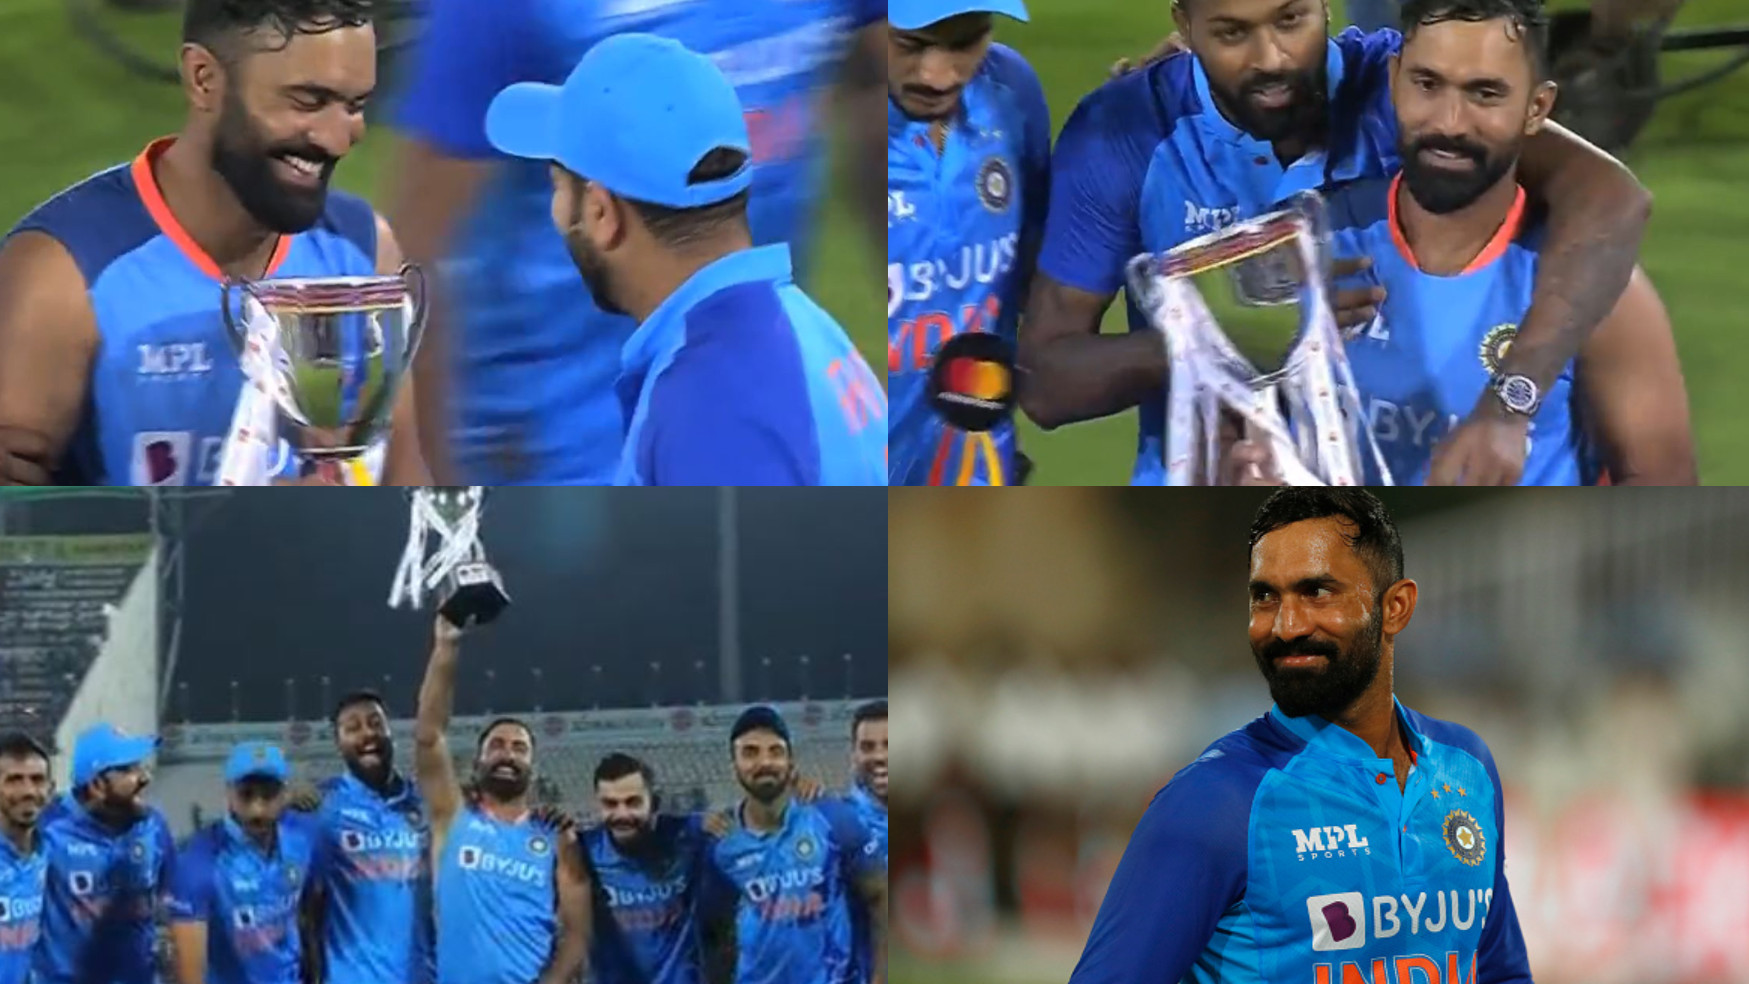 IND v AUS 2022: WATCH- ‘Youngest member with trophy’- Rohit Sharma wins hearts by handing the trophy to Dinesh Karthik